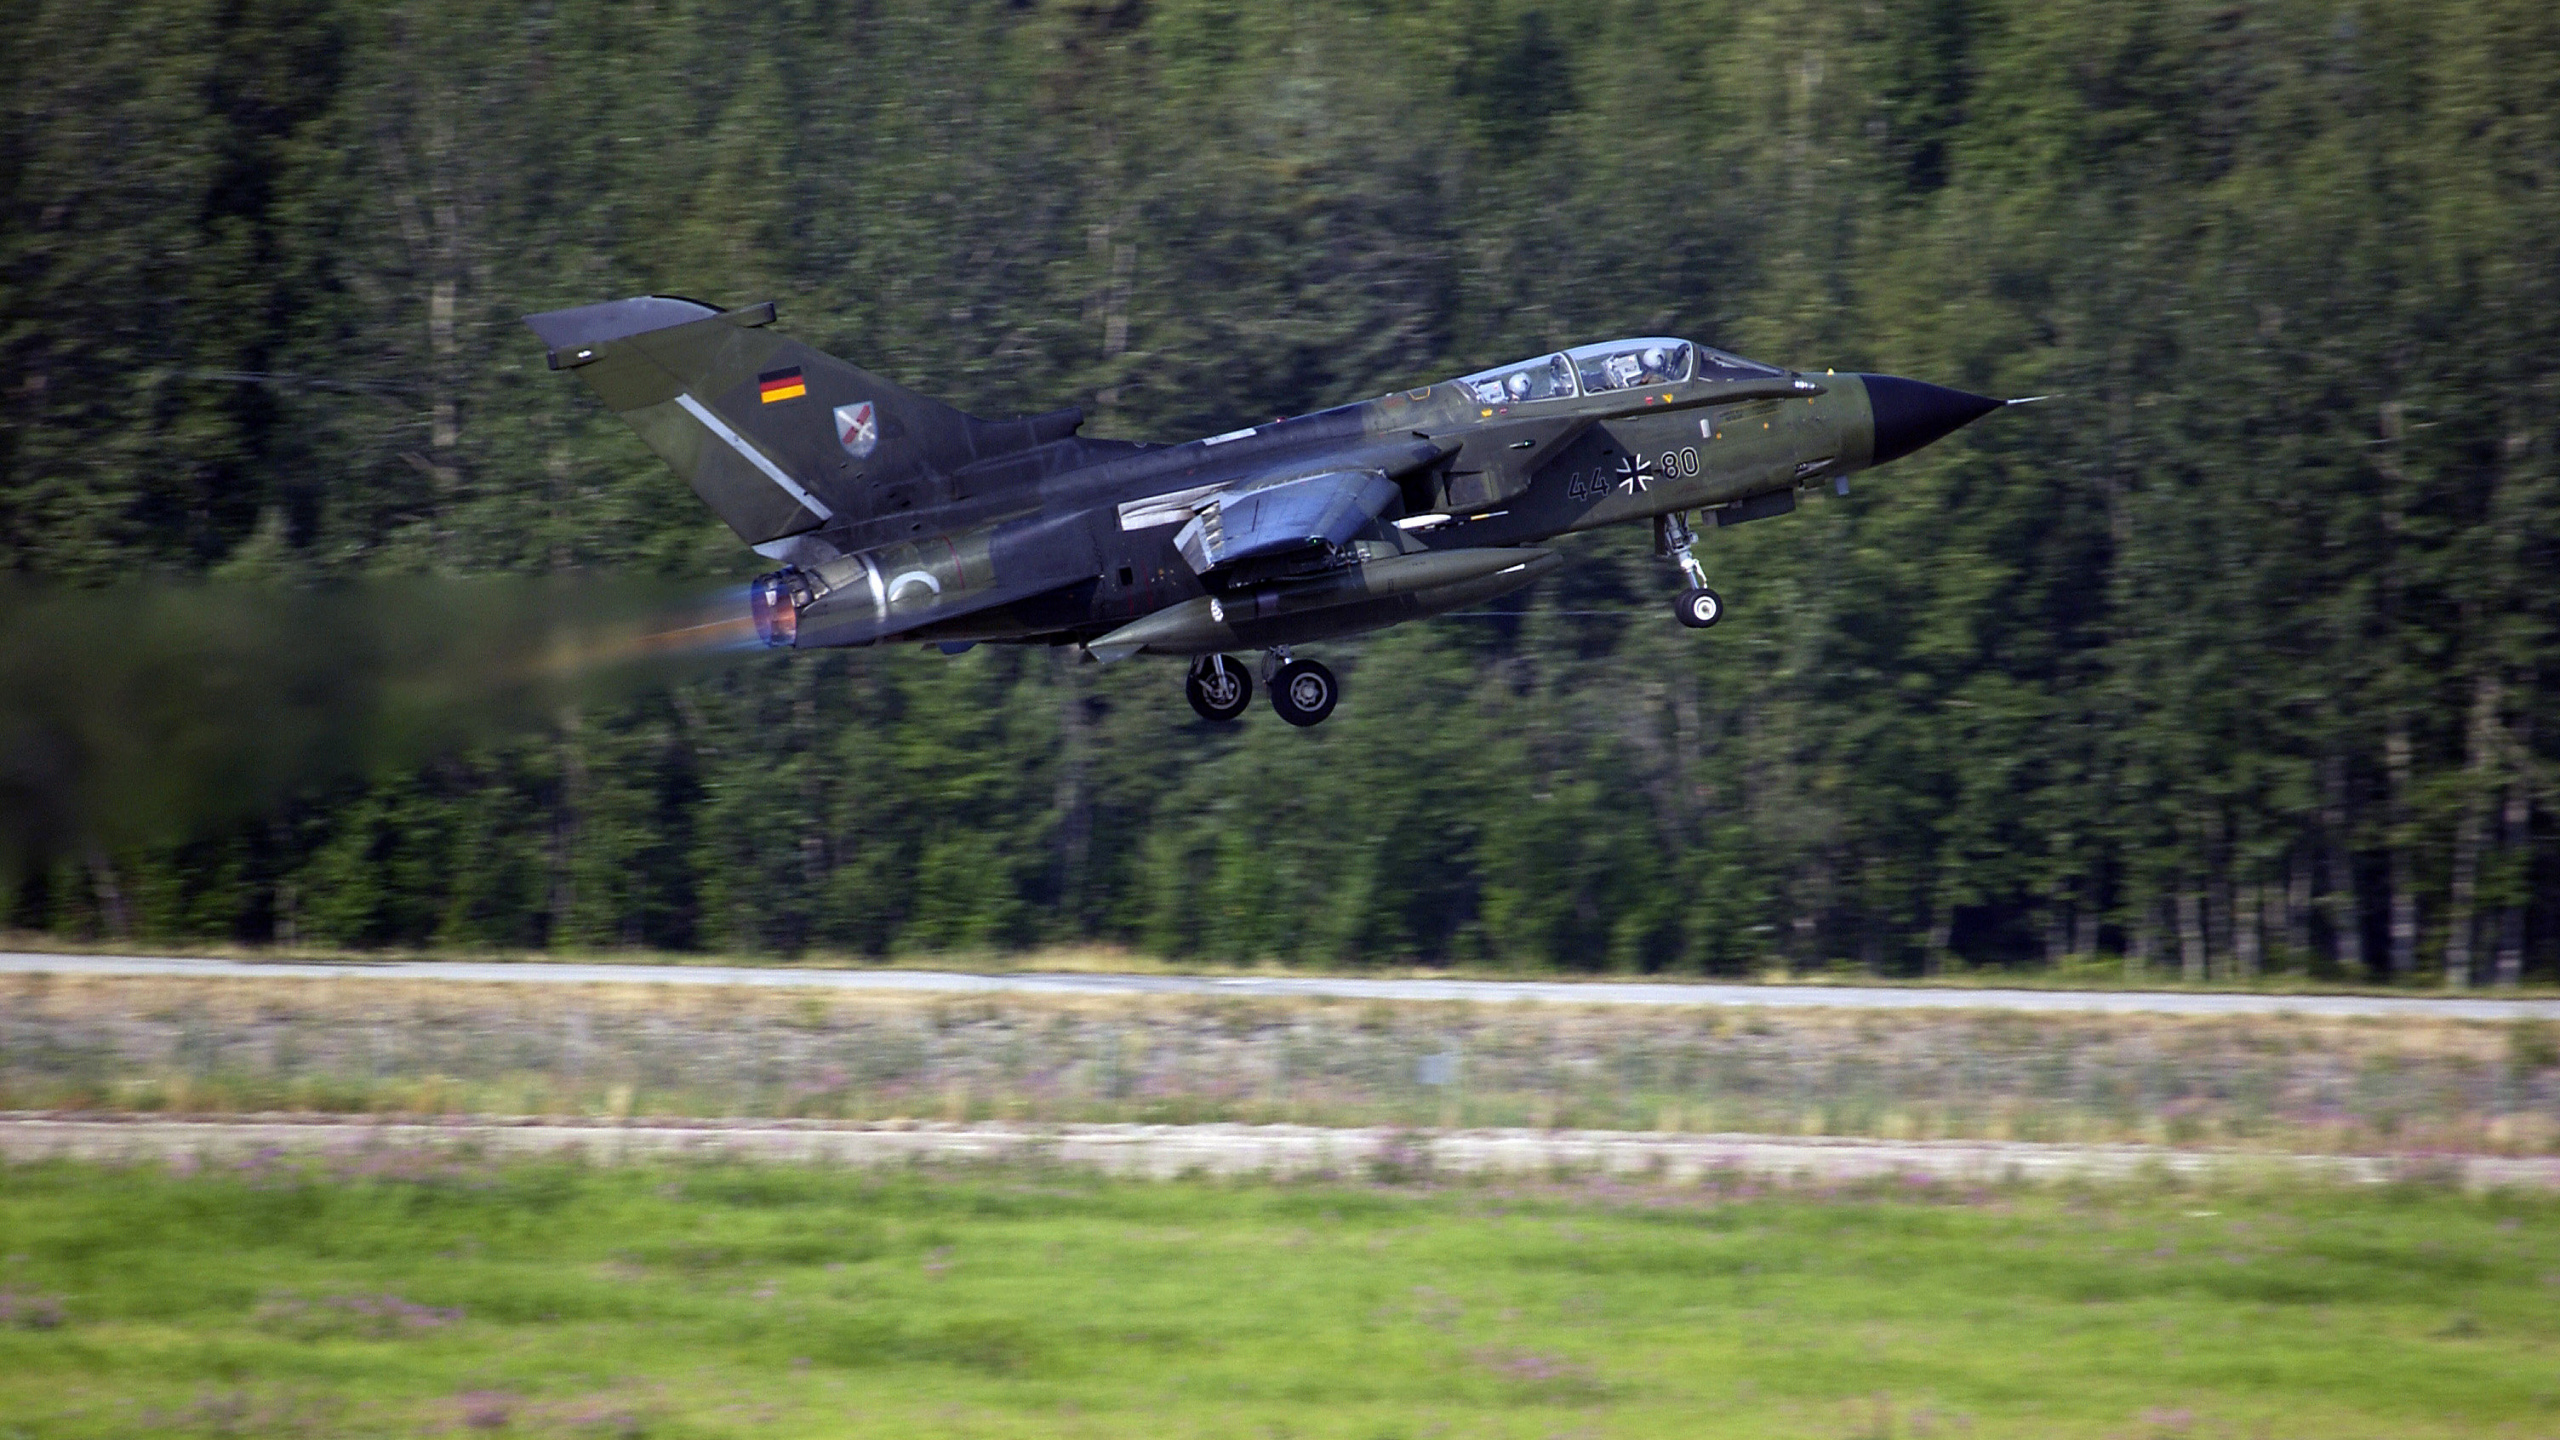 Black Jet Plane Flying Over Green Grass Field During Daytime. Wallpaper in 2560x1440 Resolution